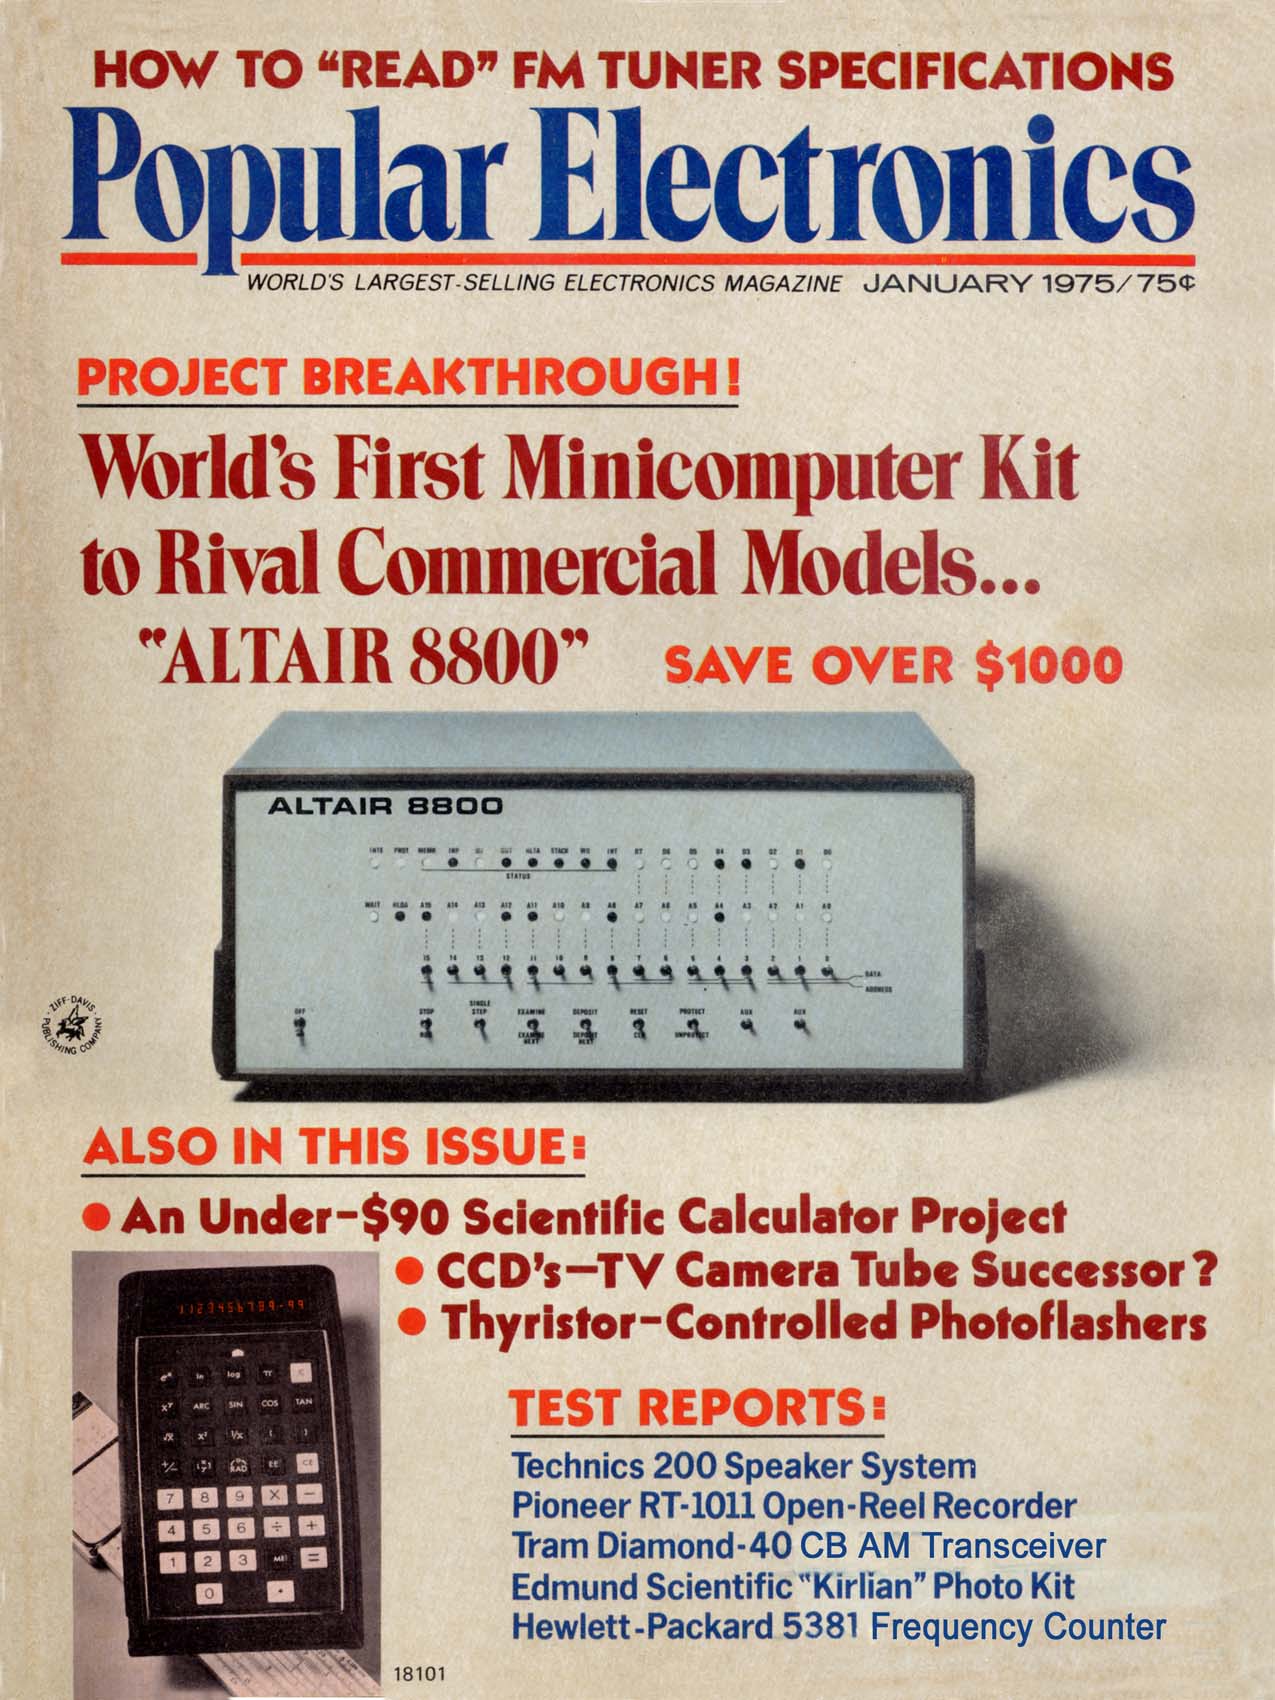 Popular Electronics with MITS Altair 8800 on the cover